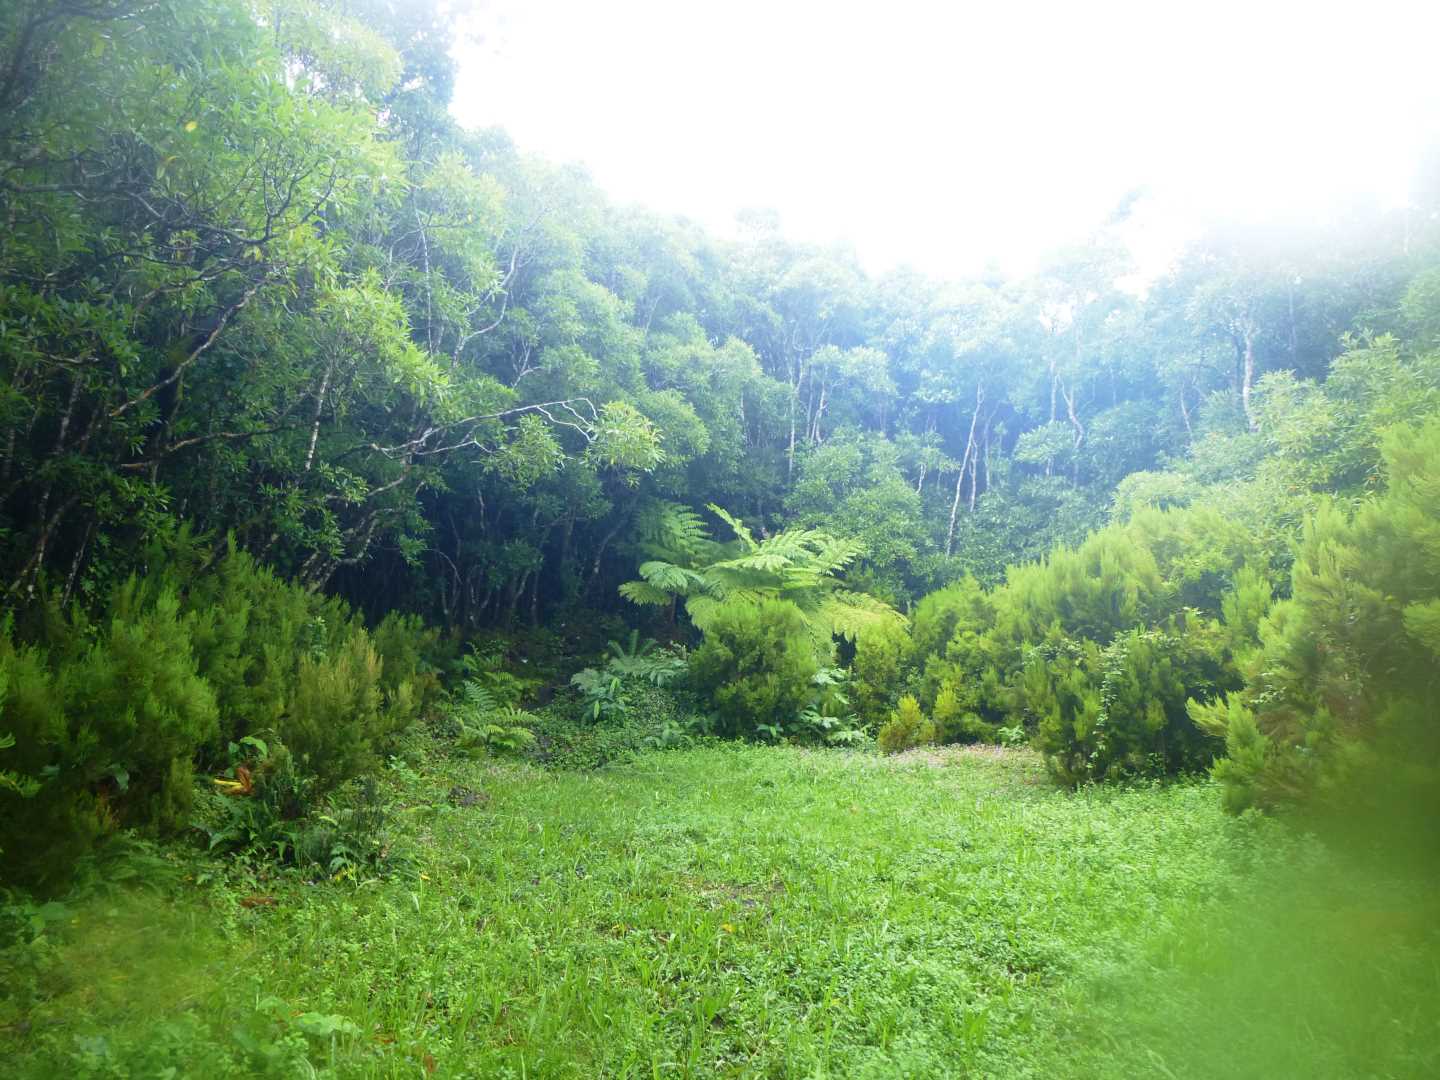 A view of a suddent forest clearing